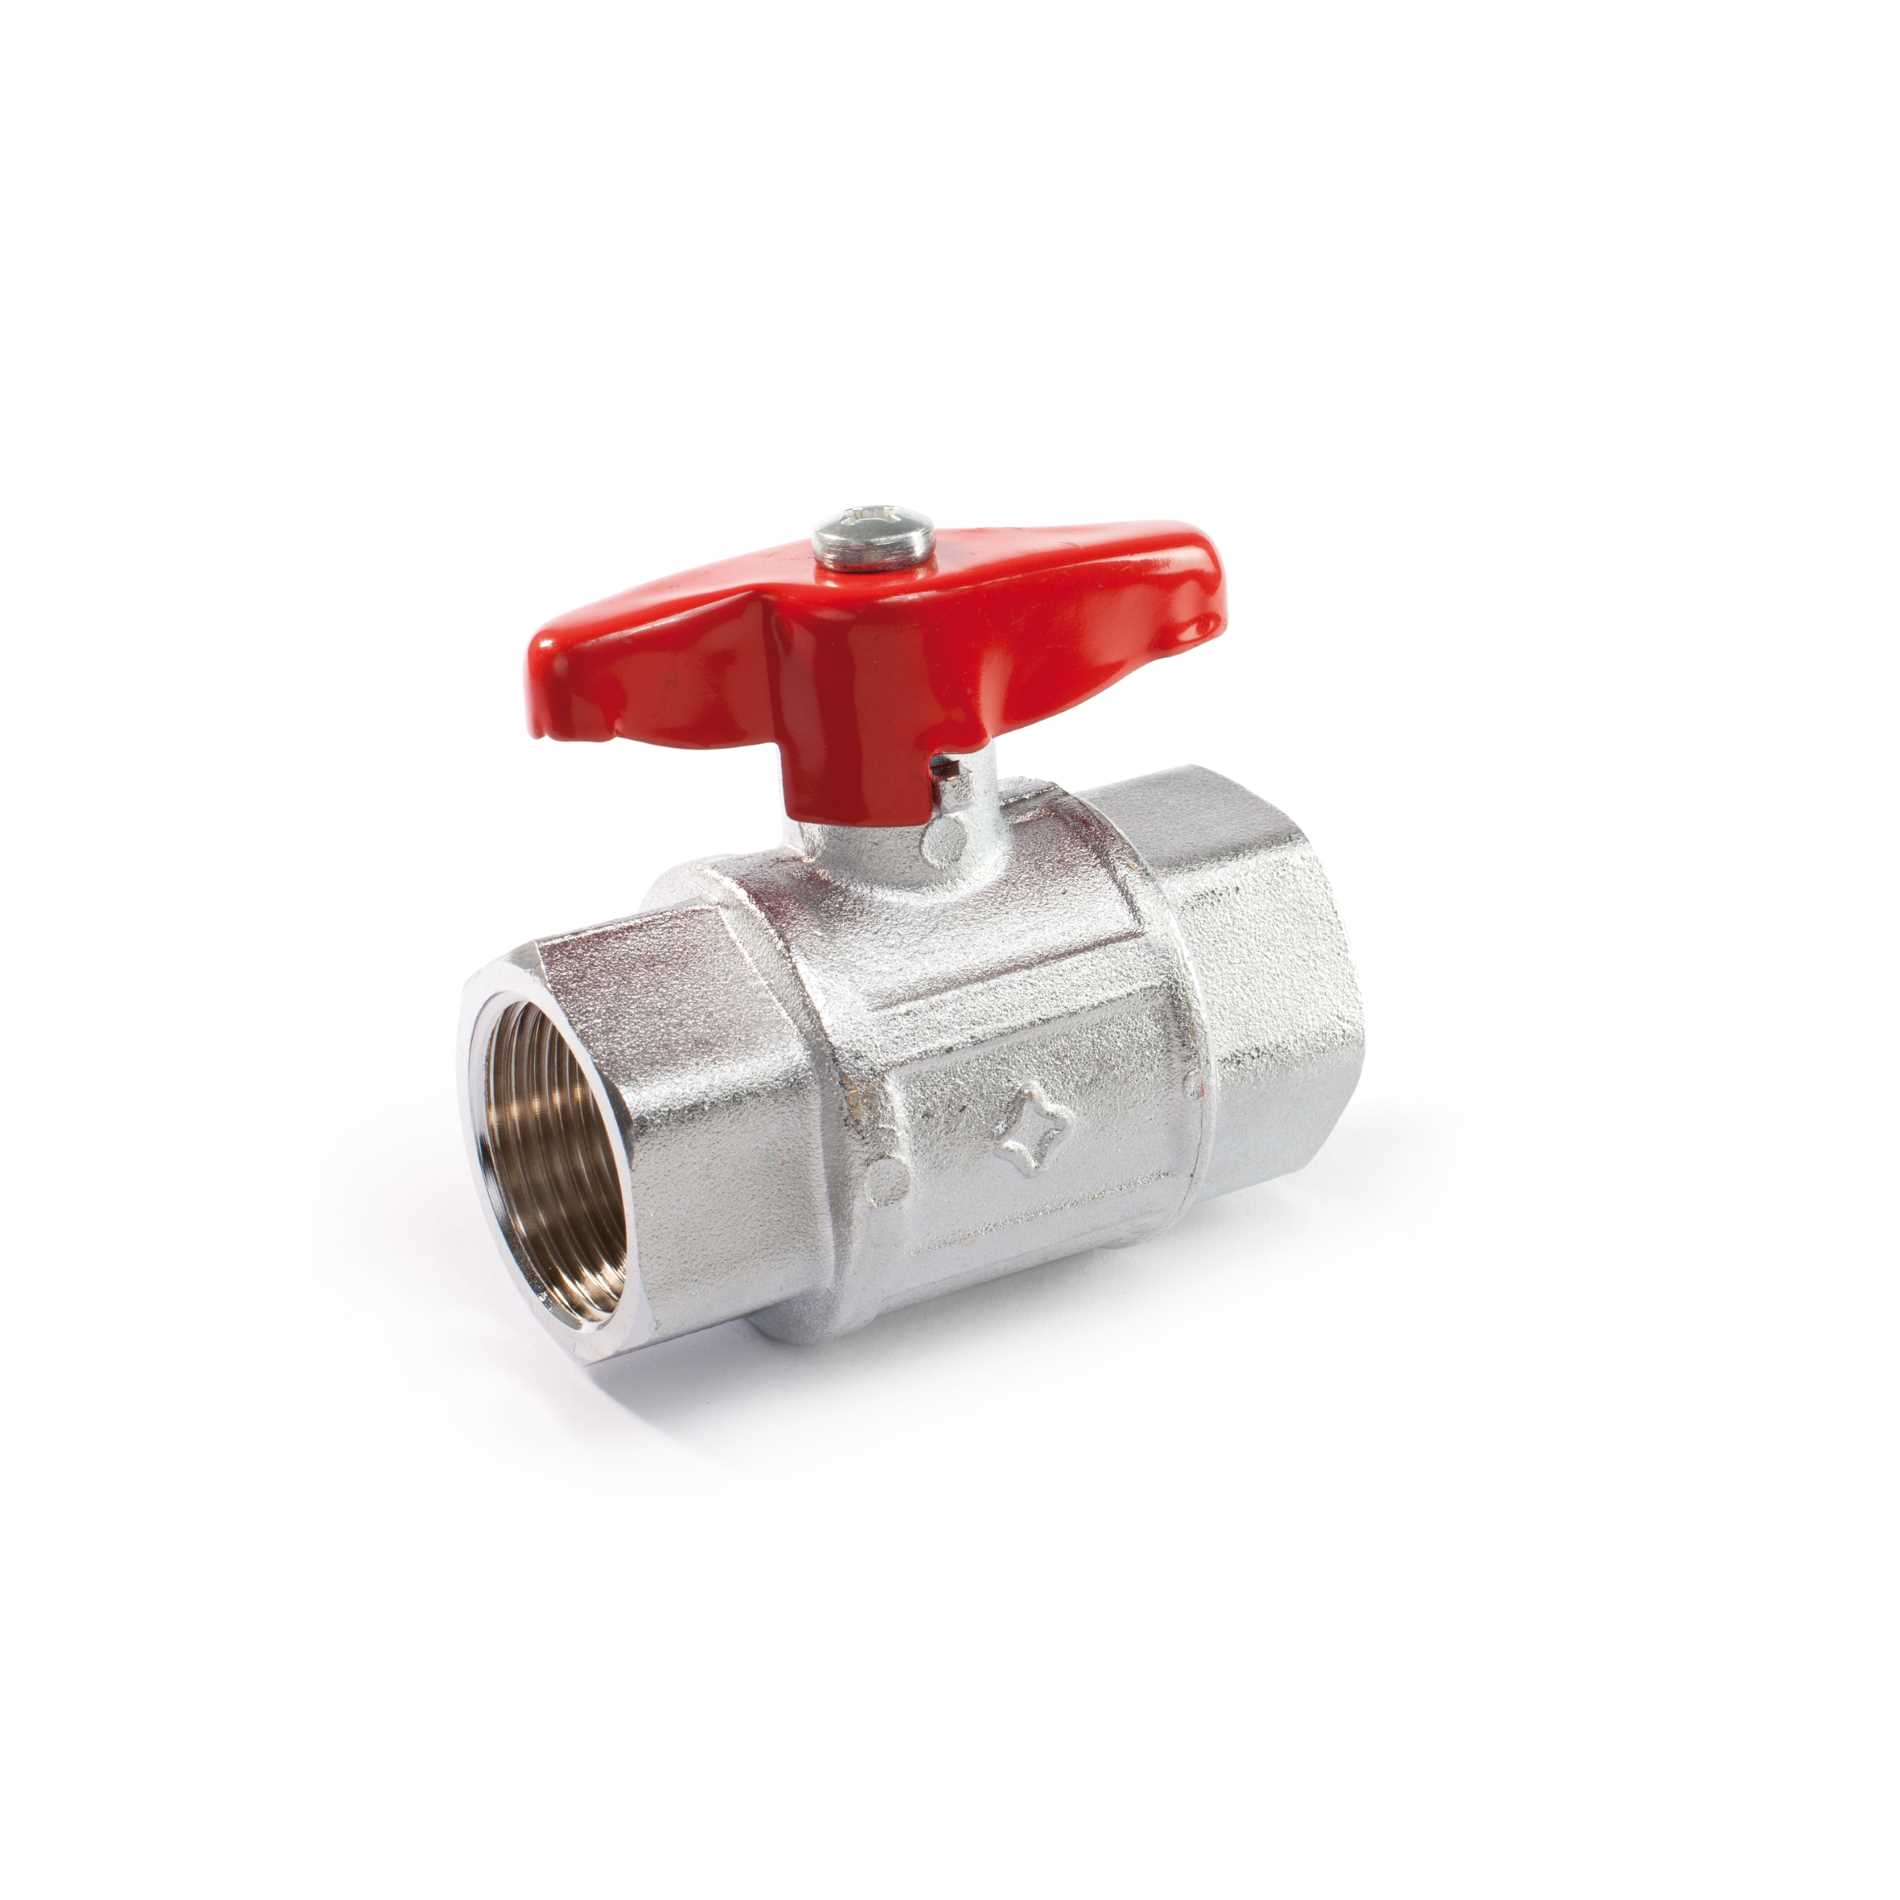 BALL VALVES FOR WATER AND HEATING BRASS CAST IRON